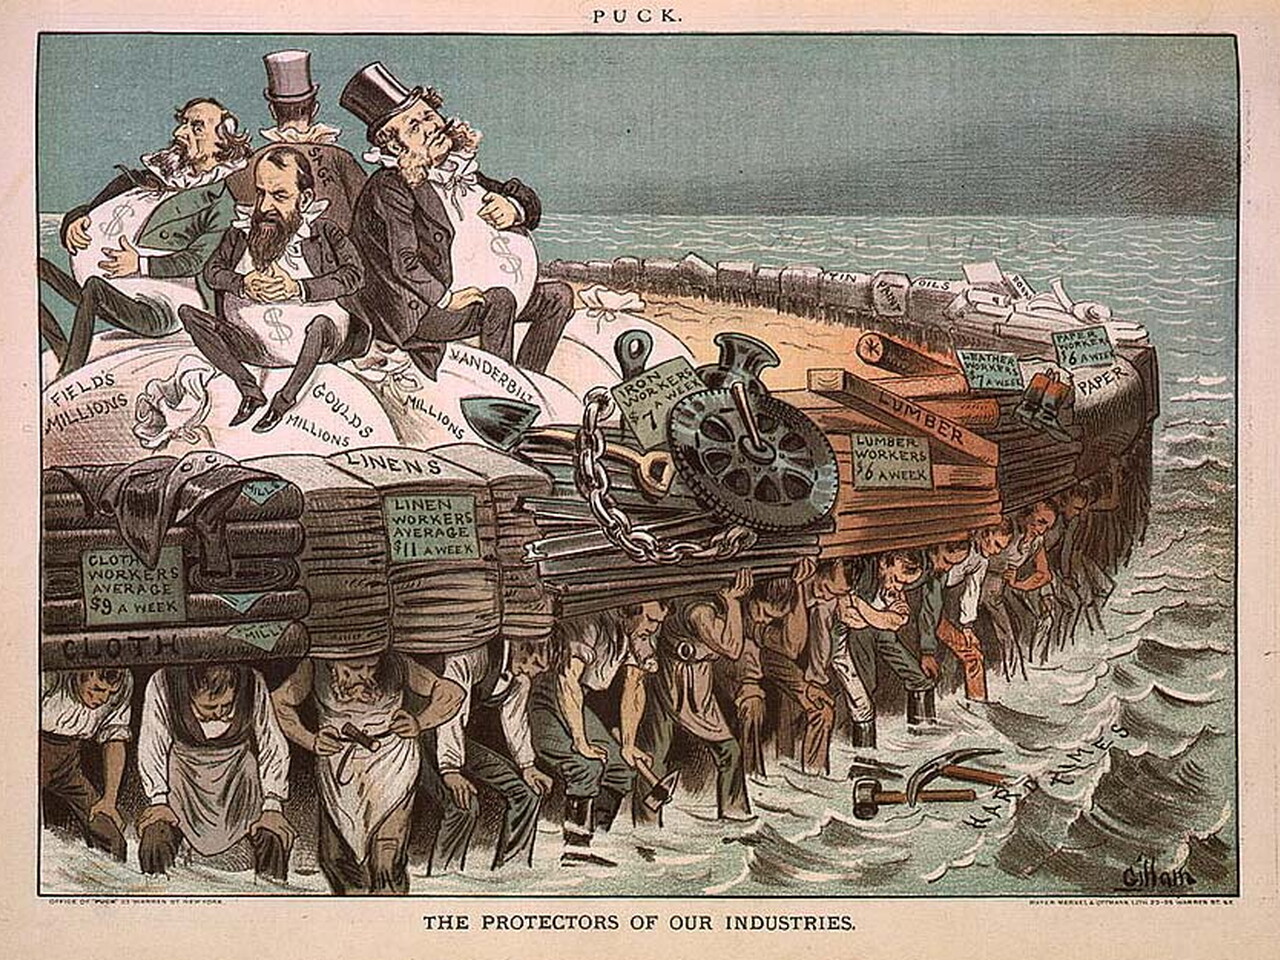 Cartoon showing Cyrus Field, Jay Gould, Cornelius Vanderbilt, and Russell Sage, seated on bags of "millions", on large raft, and being carried by workers of various professions